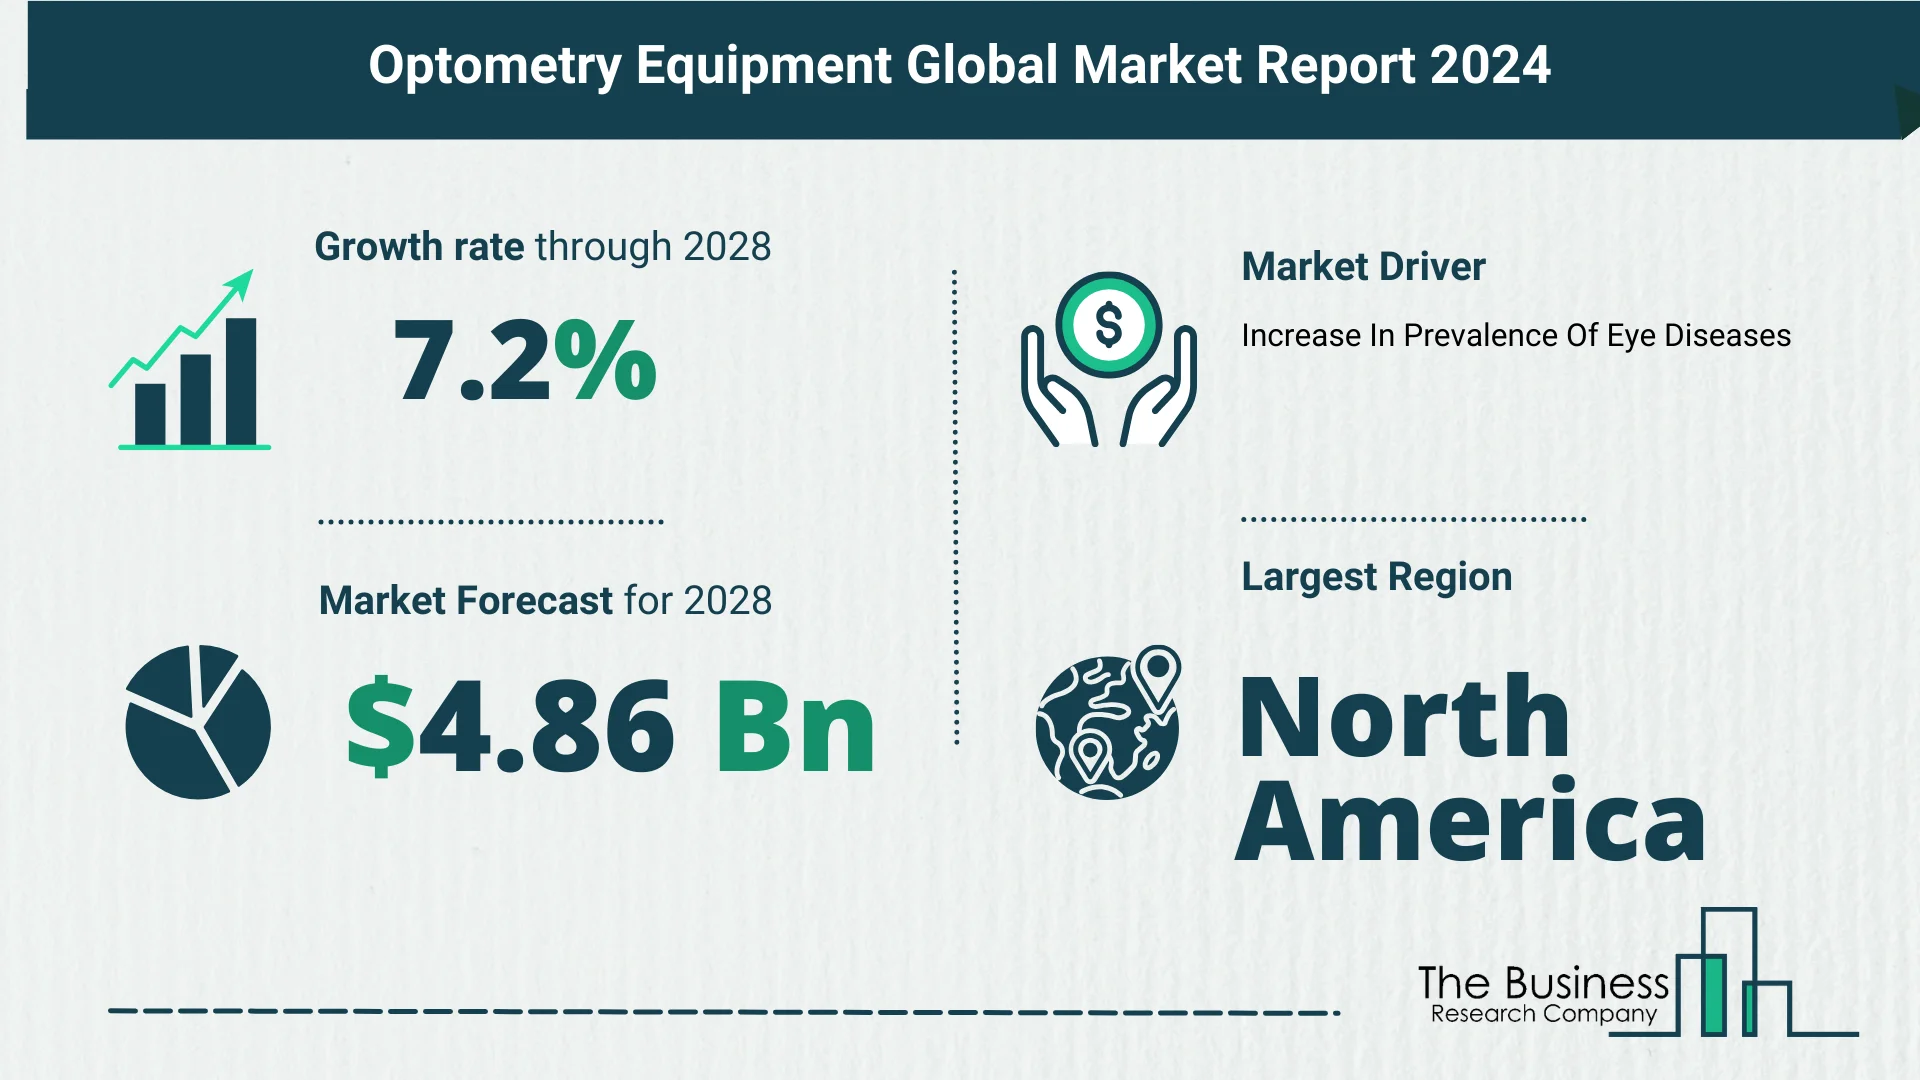 Top 5 Insights From The Optometry Equipment Market Report 2024